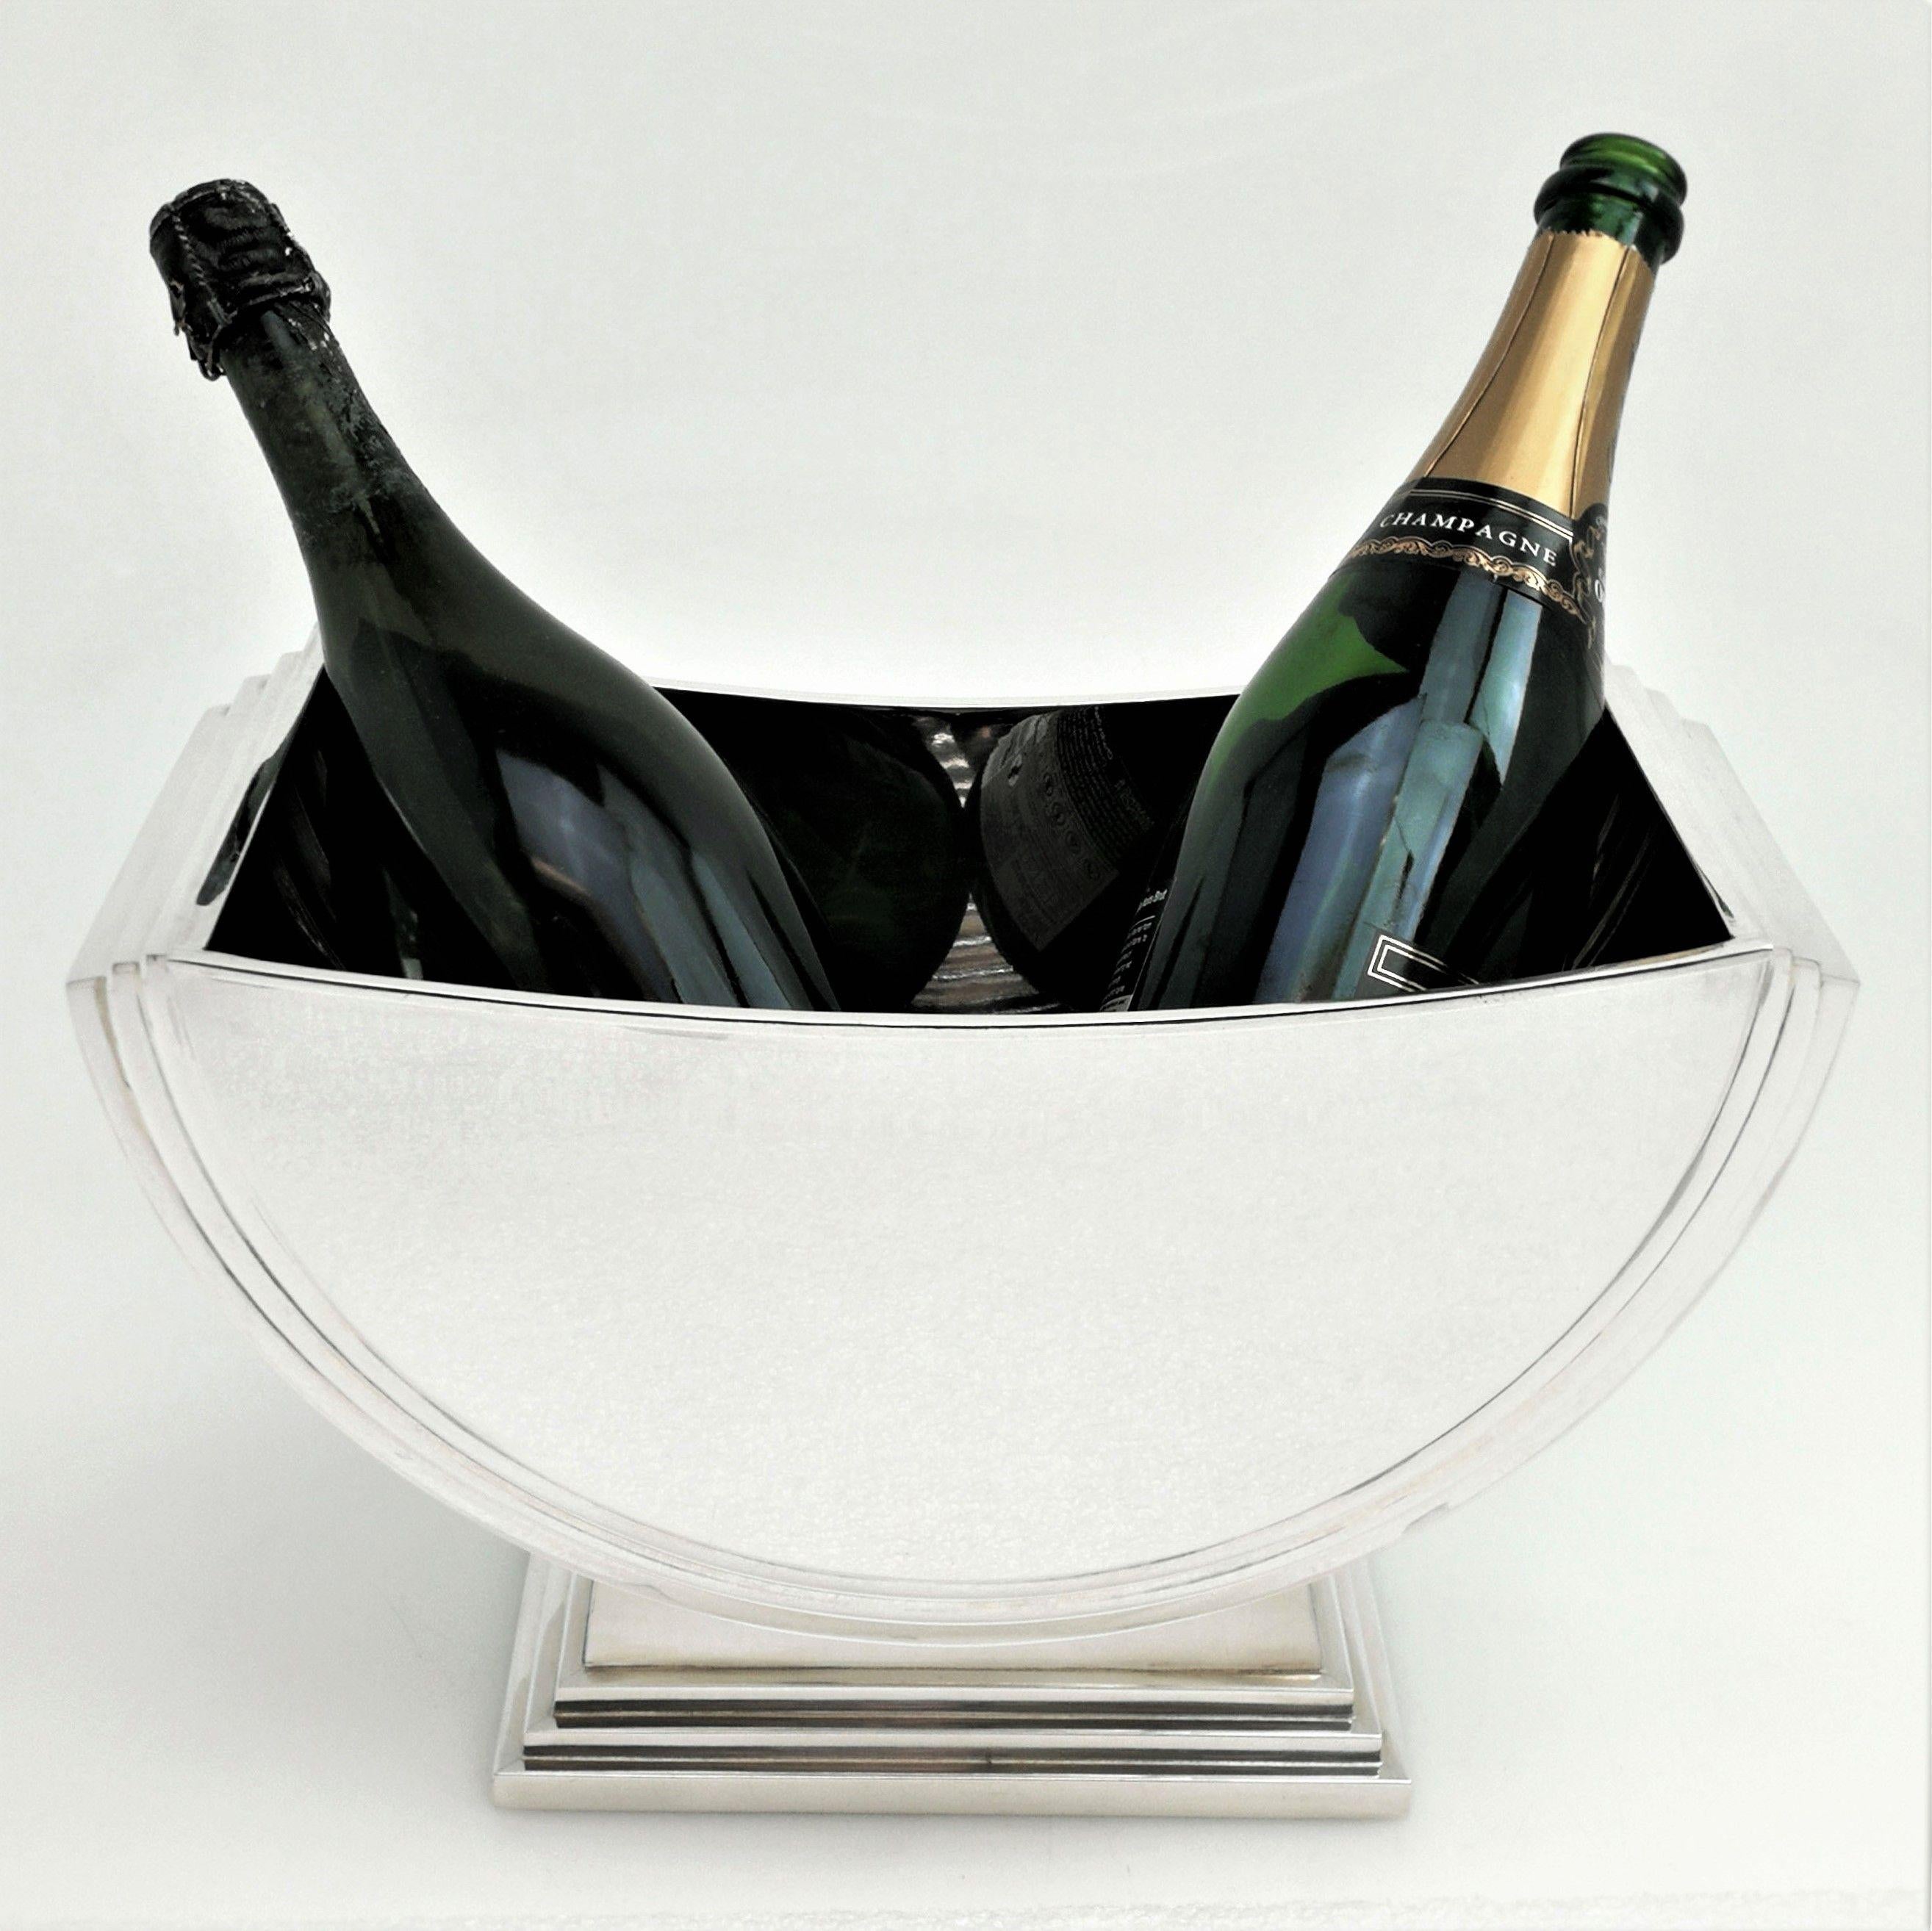 An impressive solid silver Art Deco style bowl suitable for use as a centre piece, fruit or serving bowl, and spacious enough to use as a champagne or wine cooler, with room for two bottles and ice.

Made in London in 2013, makers Mark JSA.

